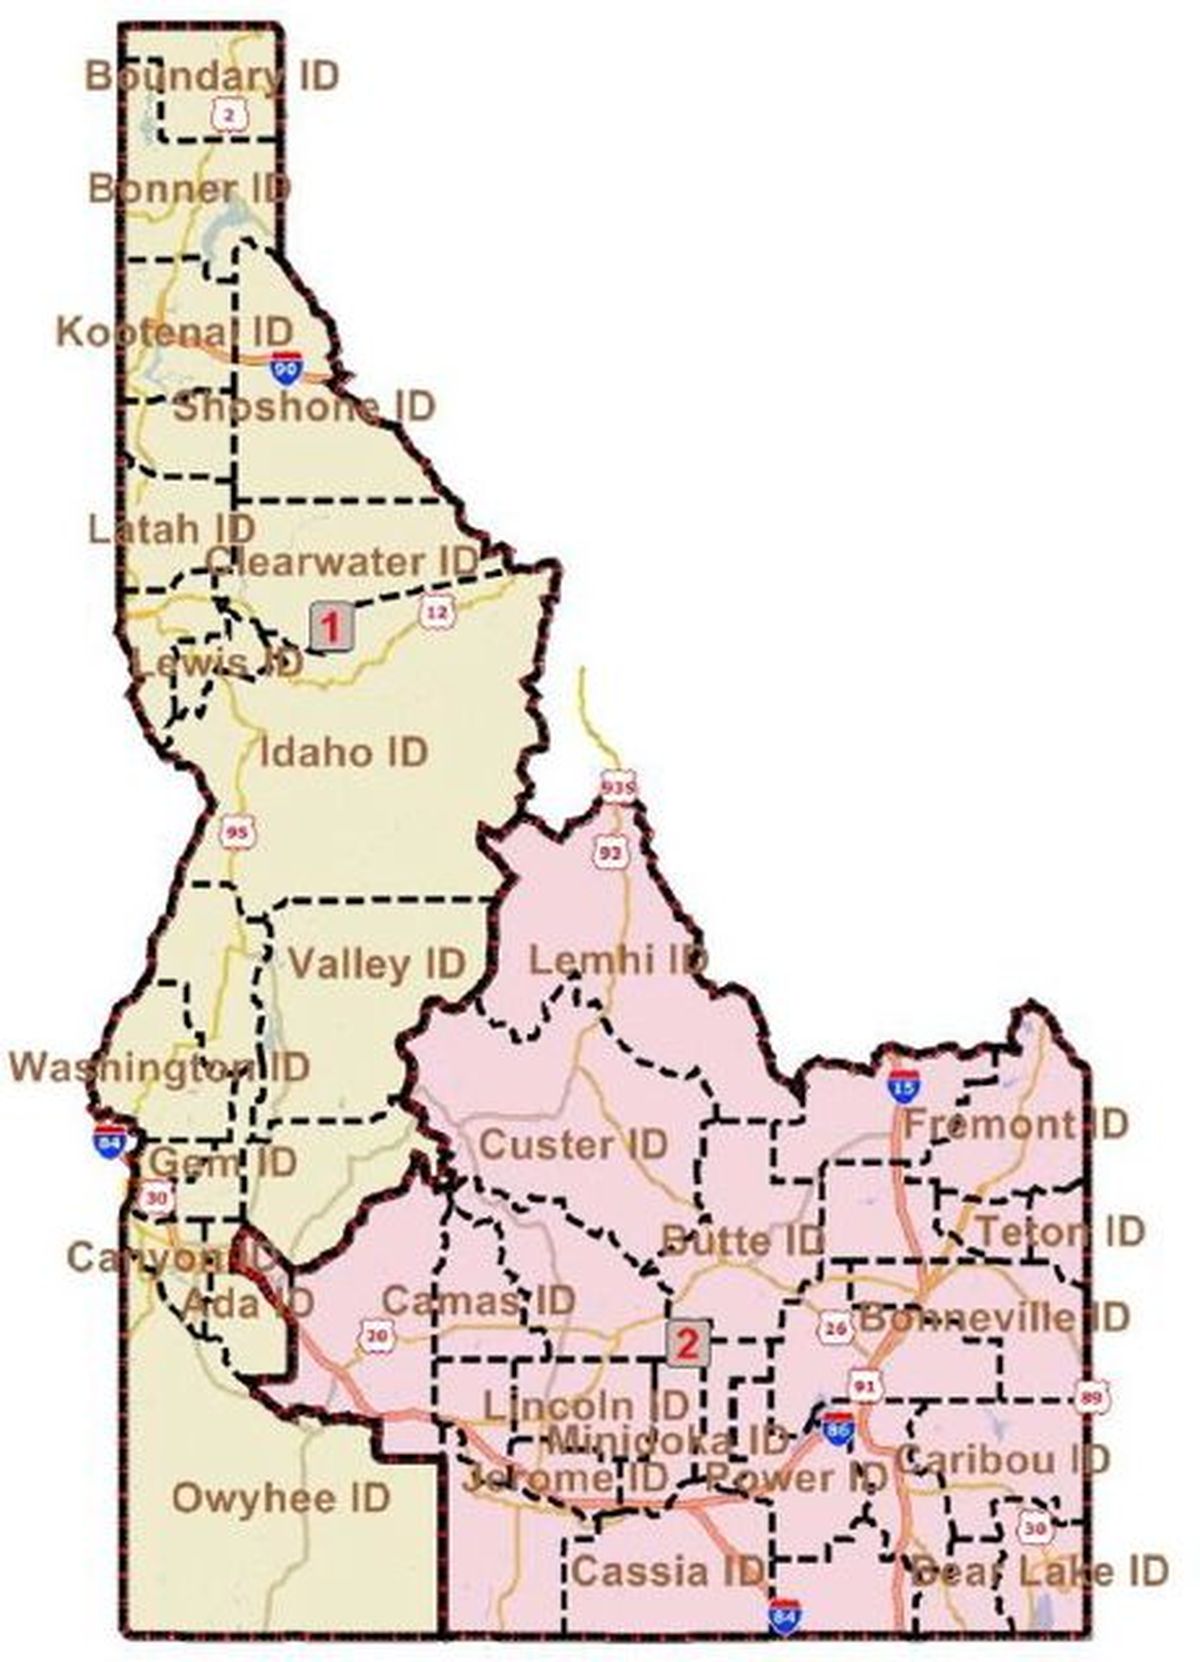 map-of-us-idaho-topographic-map-of-usa-with-states